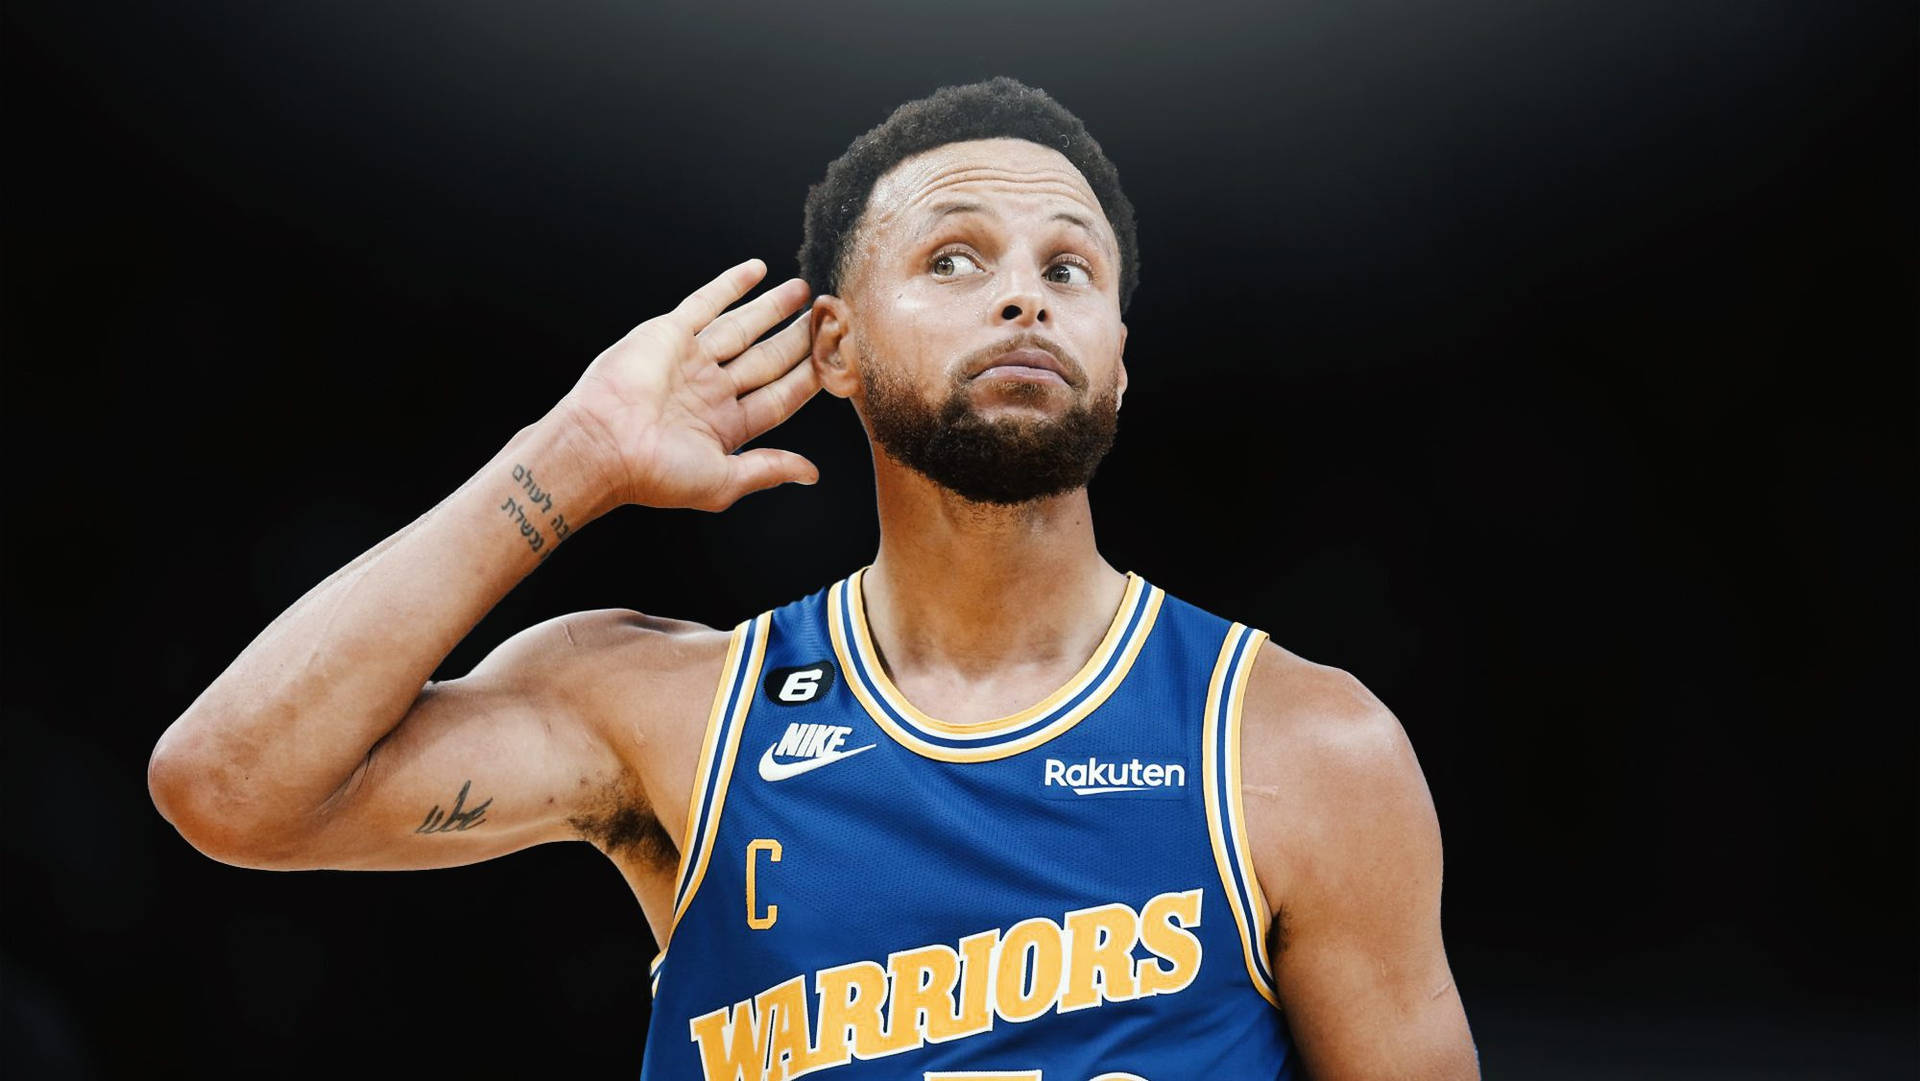 Basketball Players Stephen Curry Wallpapers on WallpaperDog